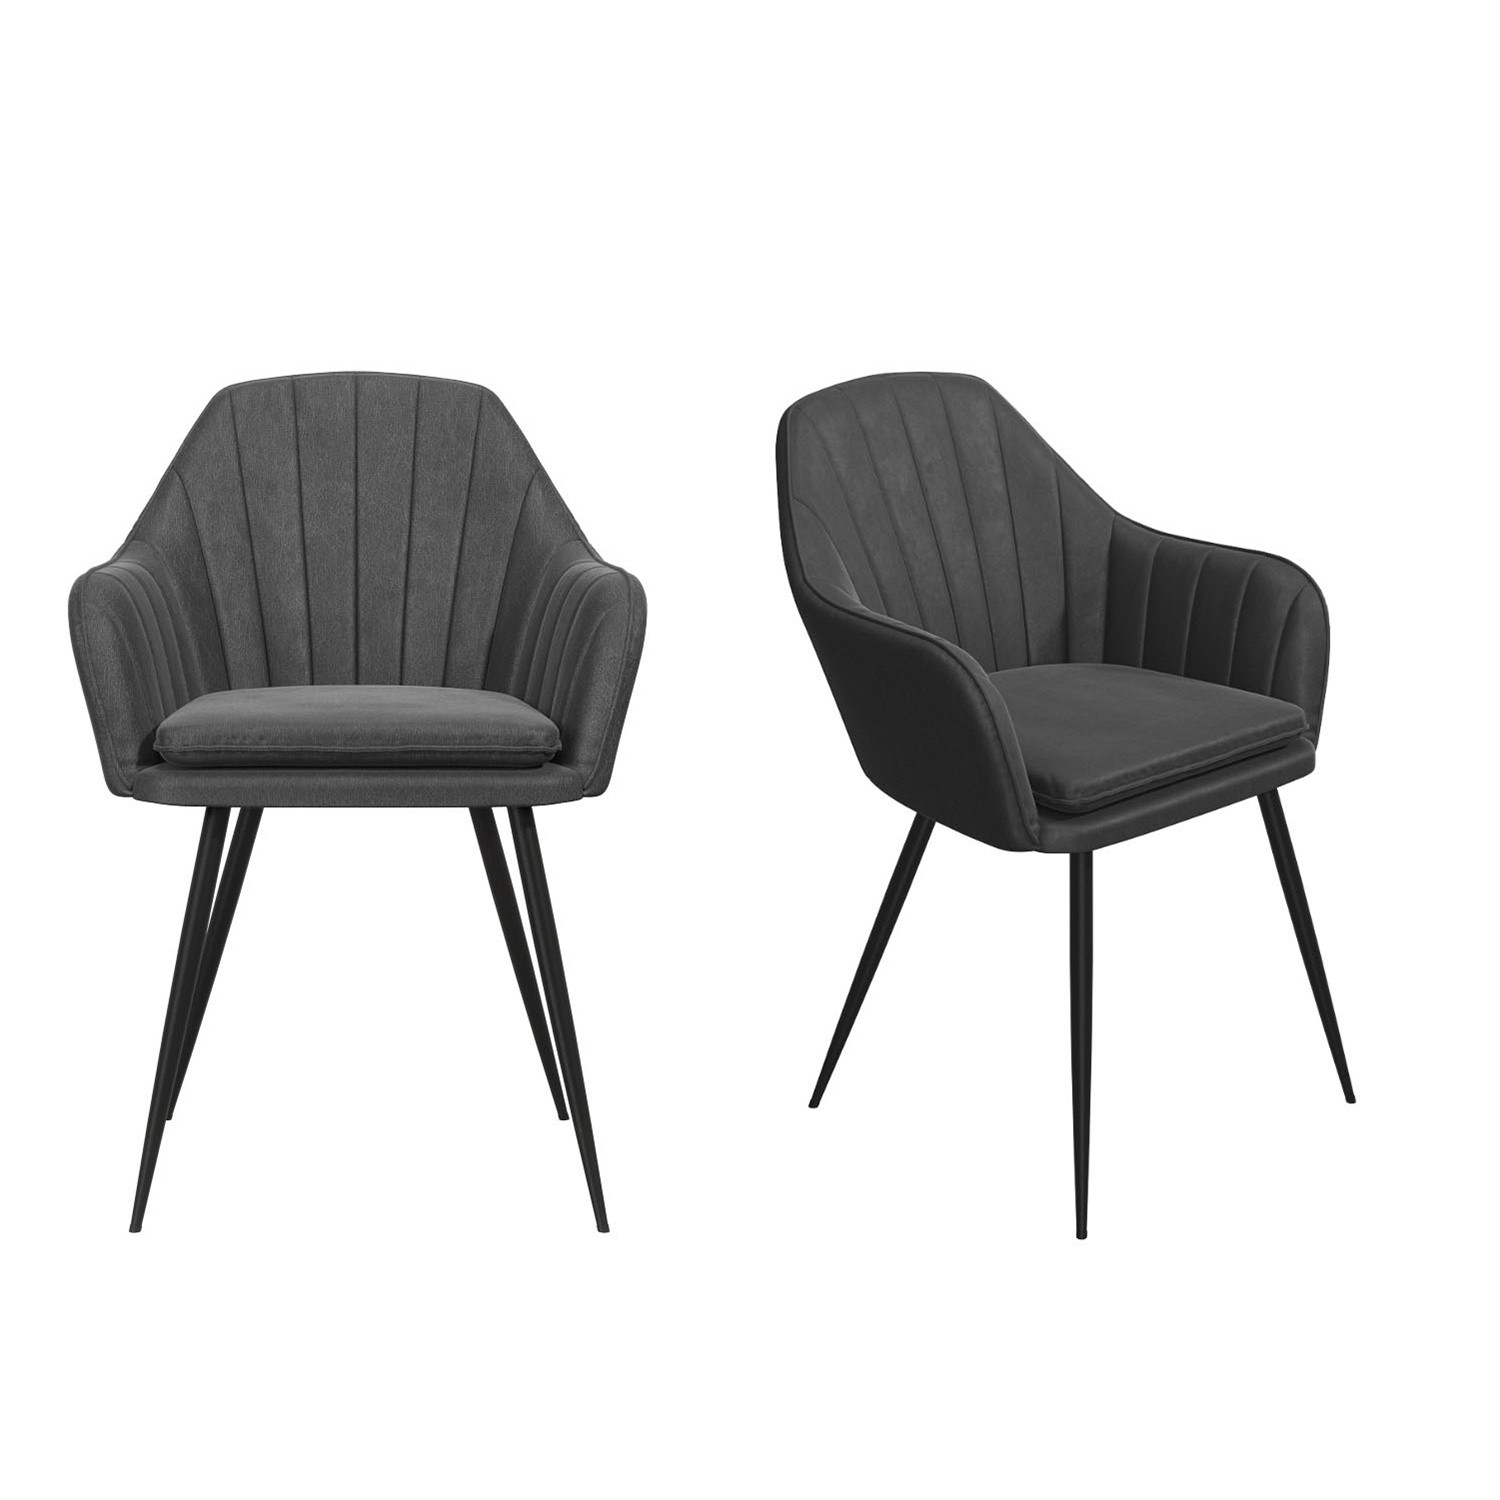 Grey Faux Leather Tub Chairs with Black Legs  Set of 2  Logan